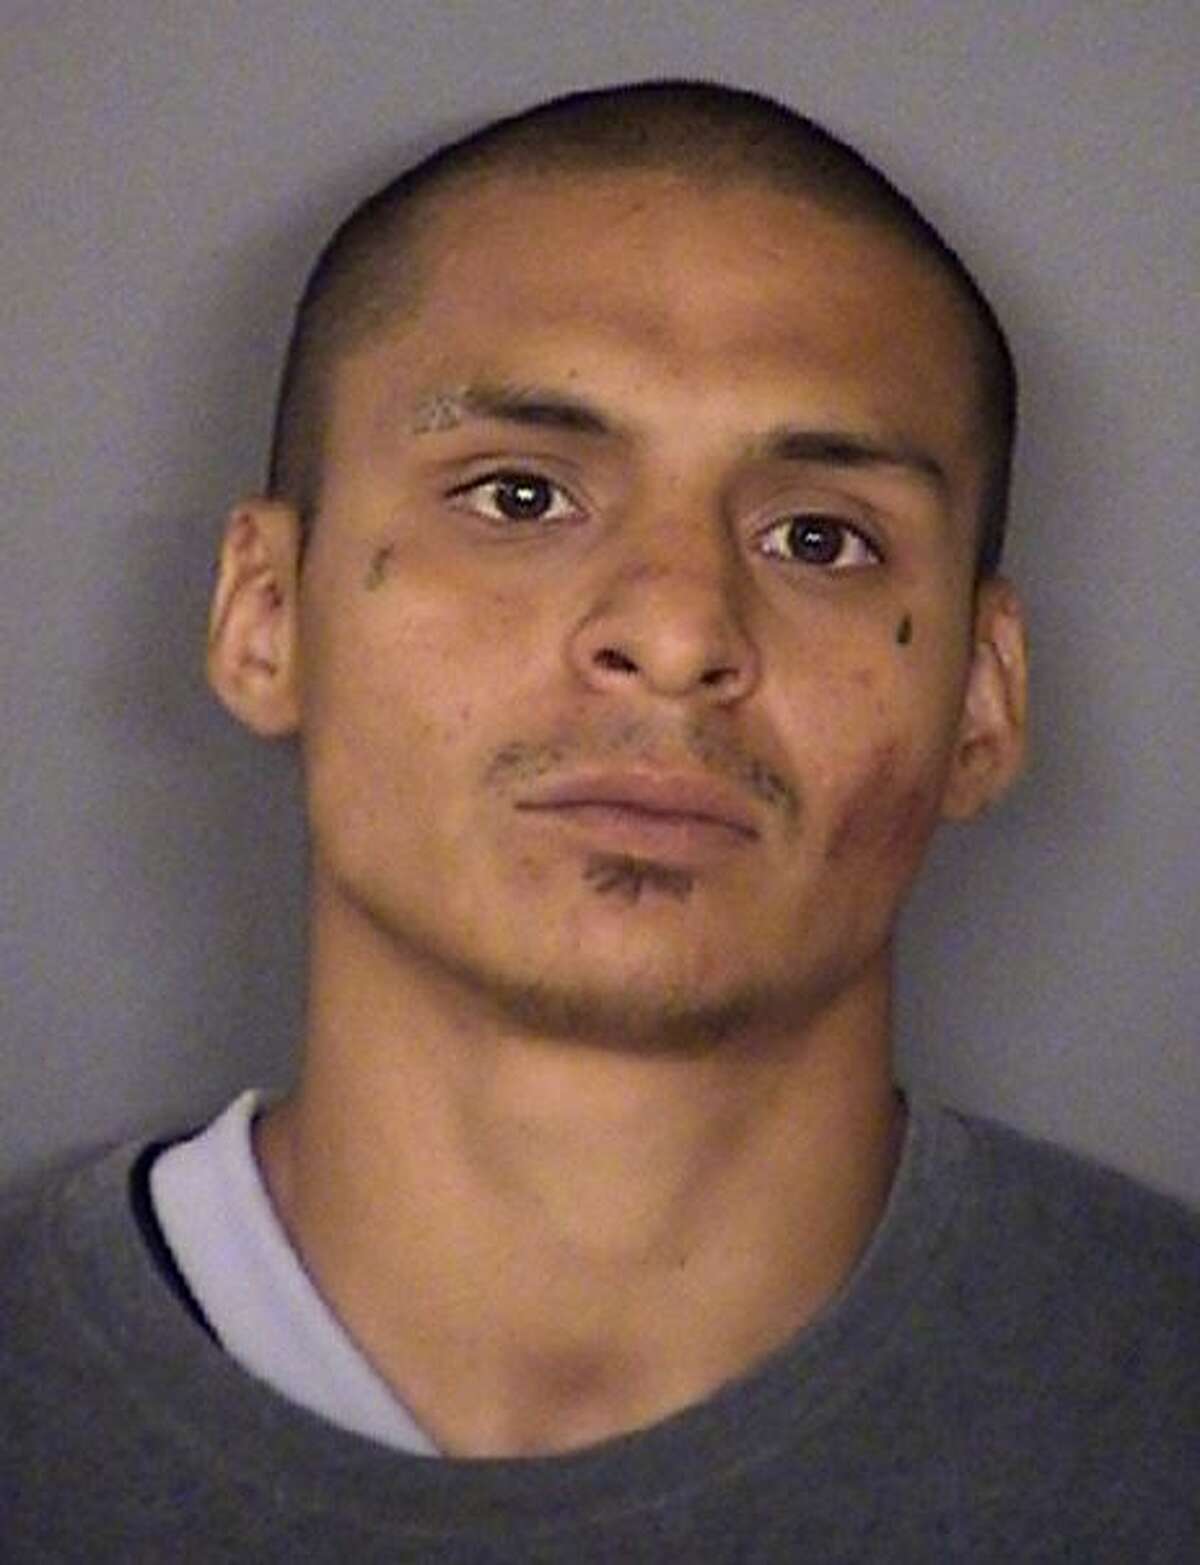 Robert Reyes Jr. was gunned down around 6:35 p.m. on Saturday, June 10, in the 8200 block of South Flores Street at the River Bend Apartments.